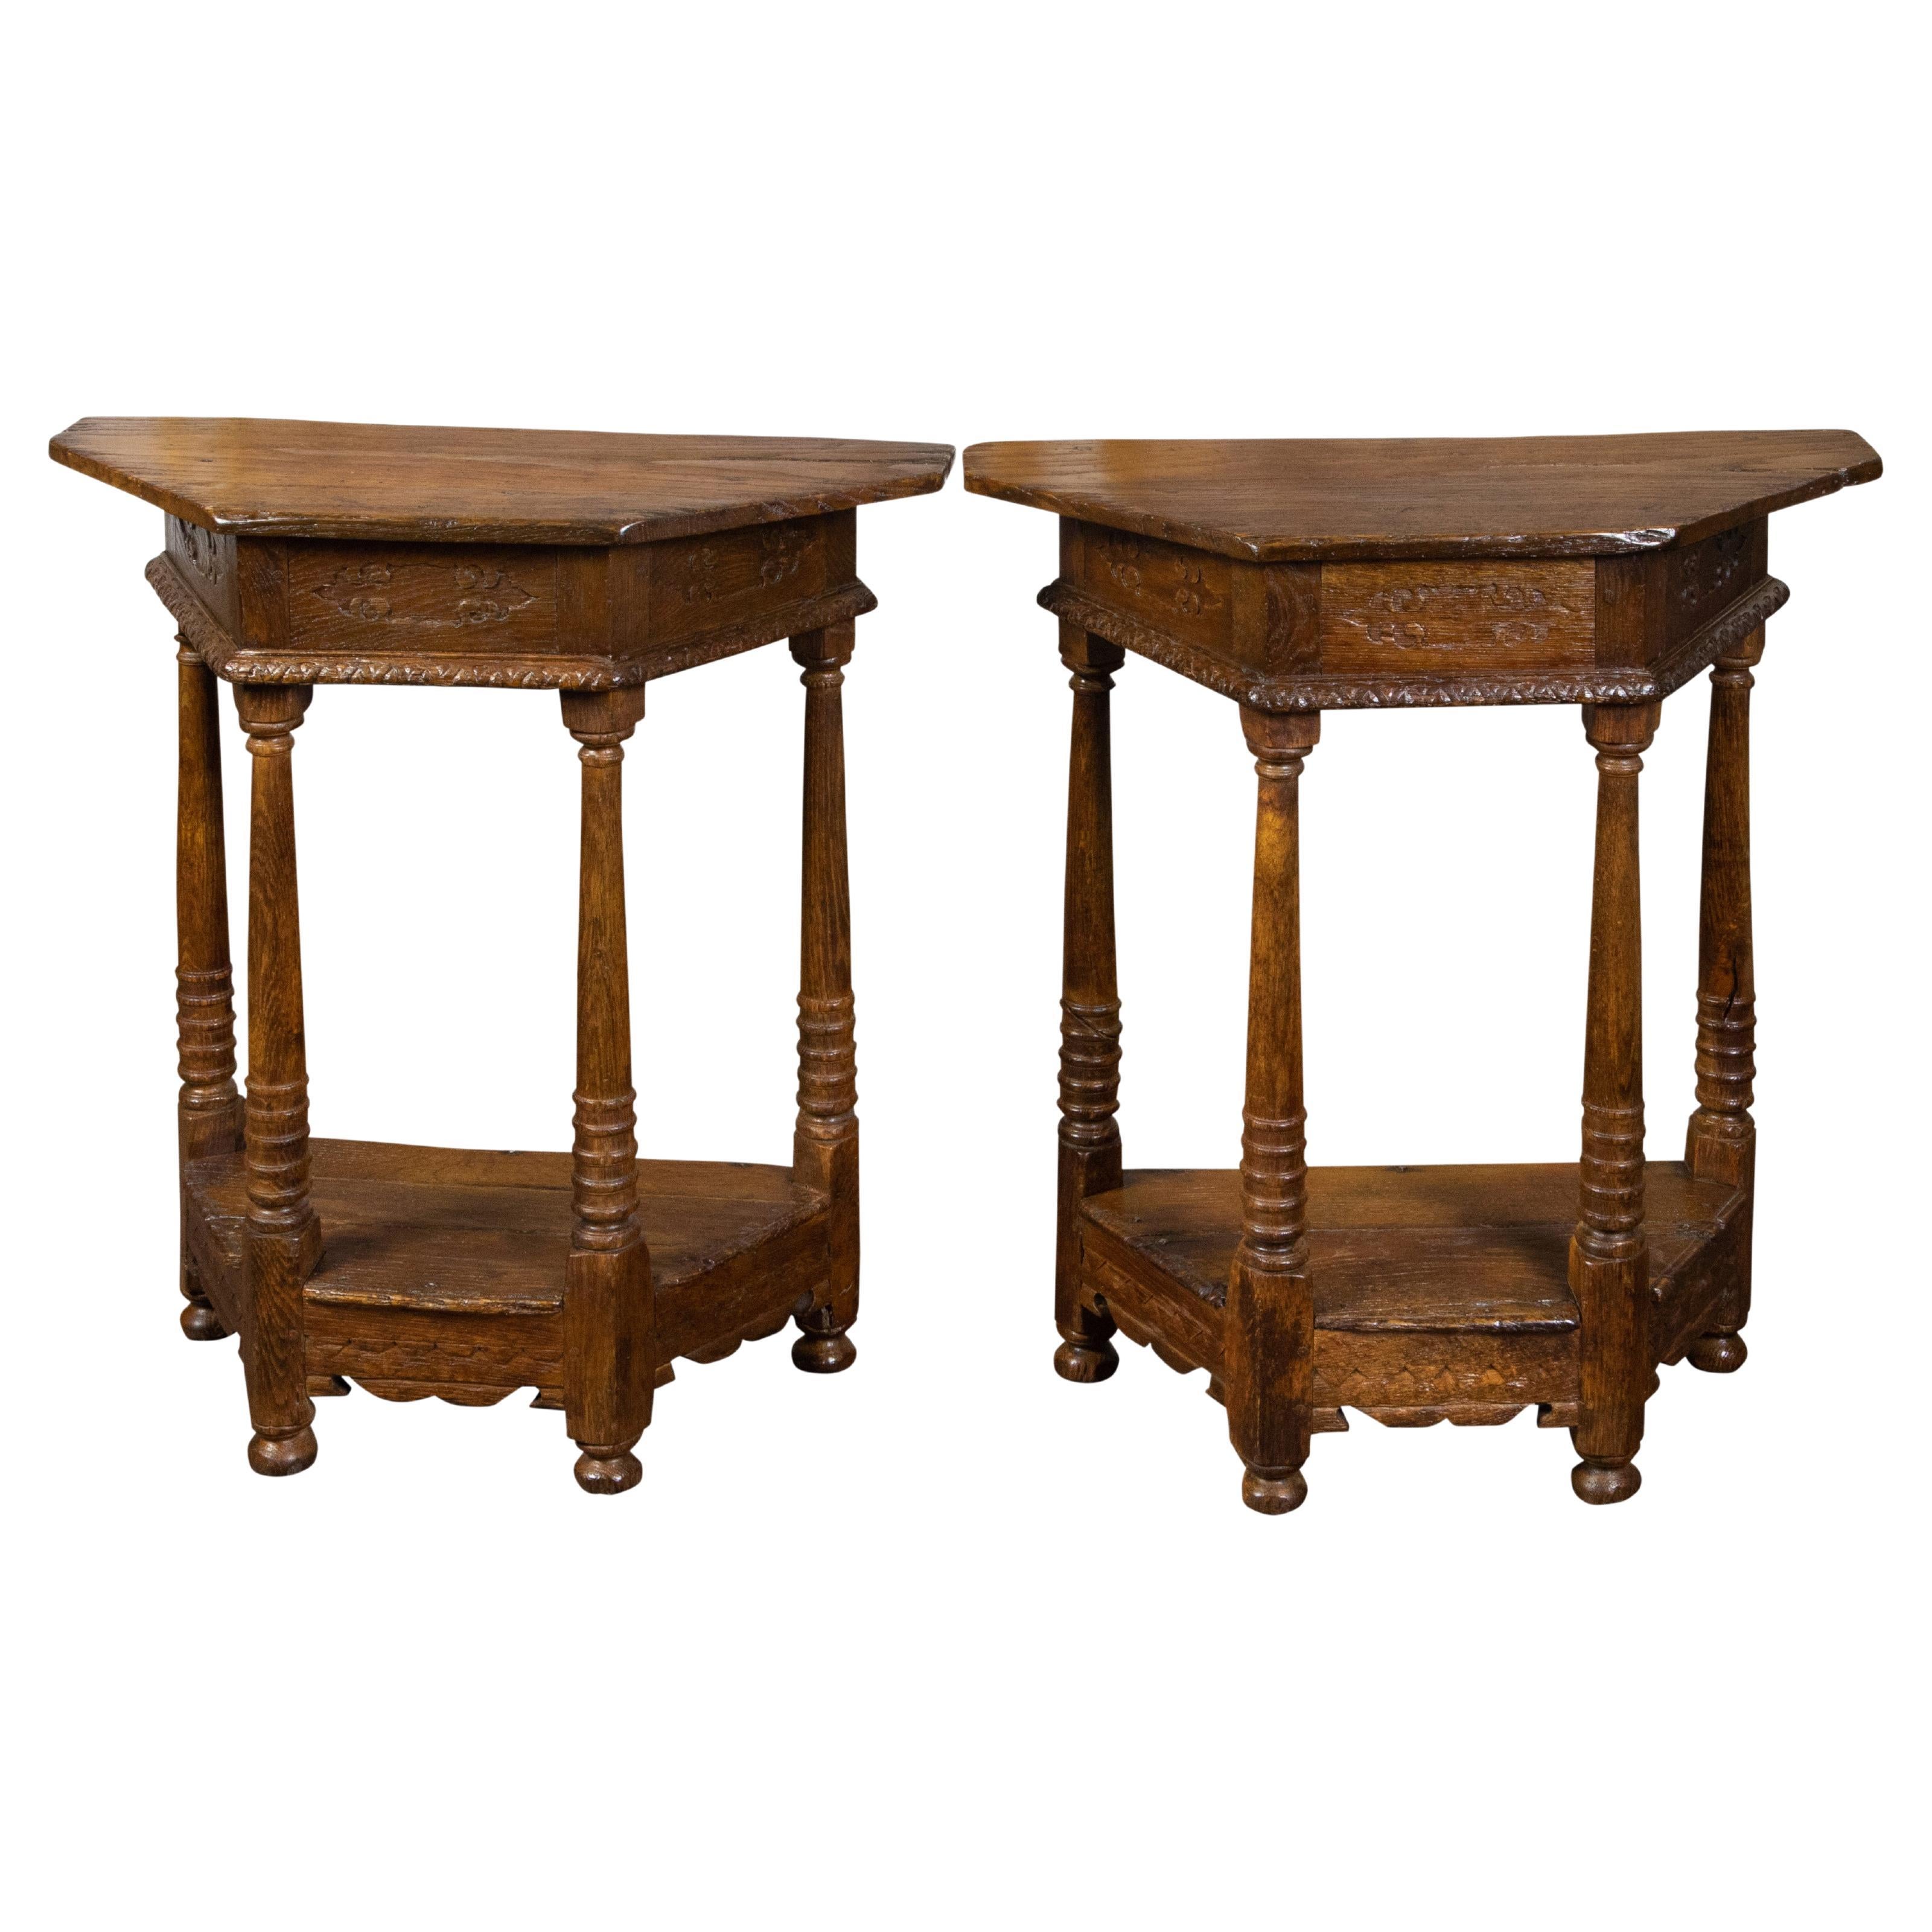 Pair of 19th Century English Carved Oak Demilune Tables with Column Legs